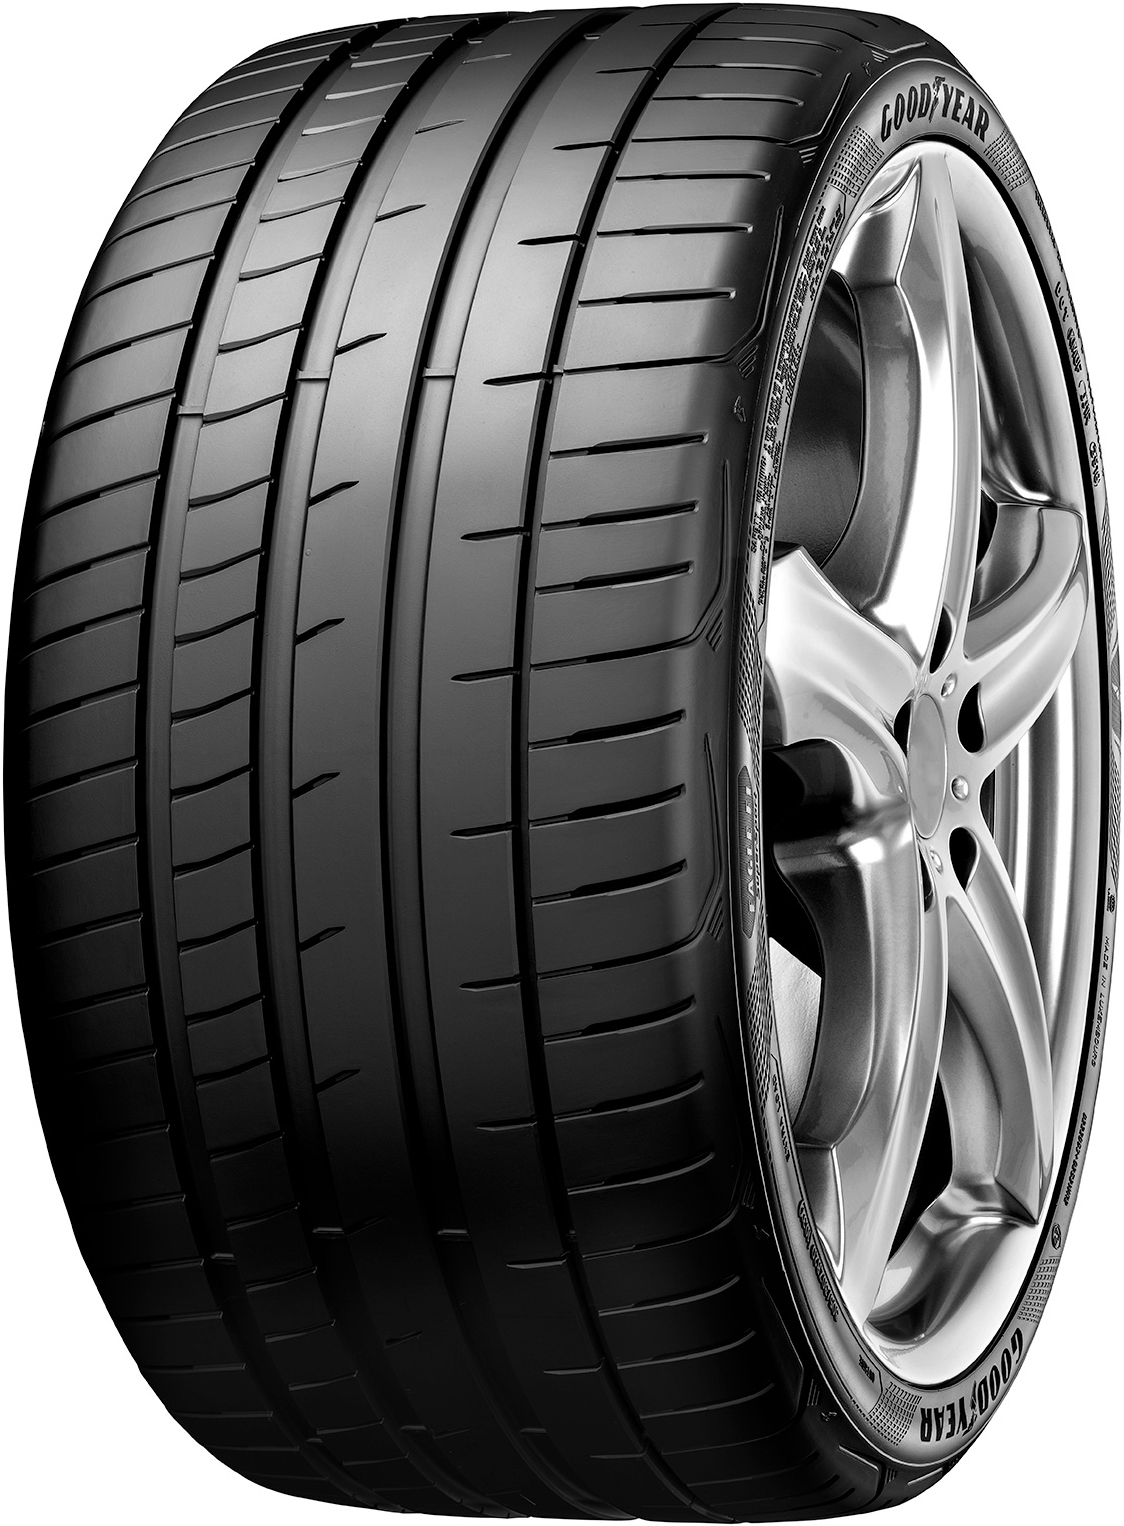 Anvelope auto GOODYEAR F1 SUPERSPORT XL FP 225/35 R20 99Y